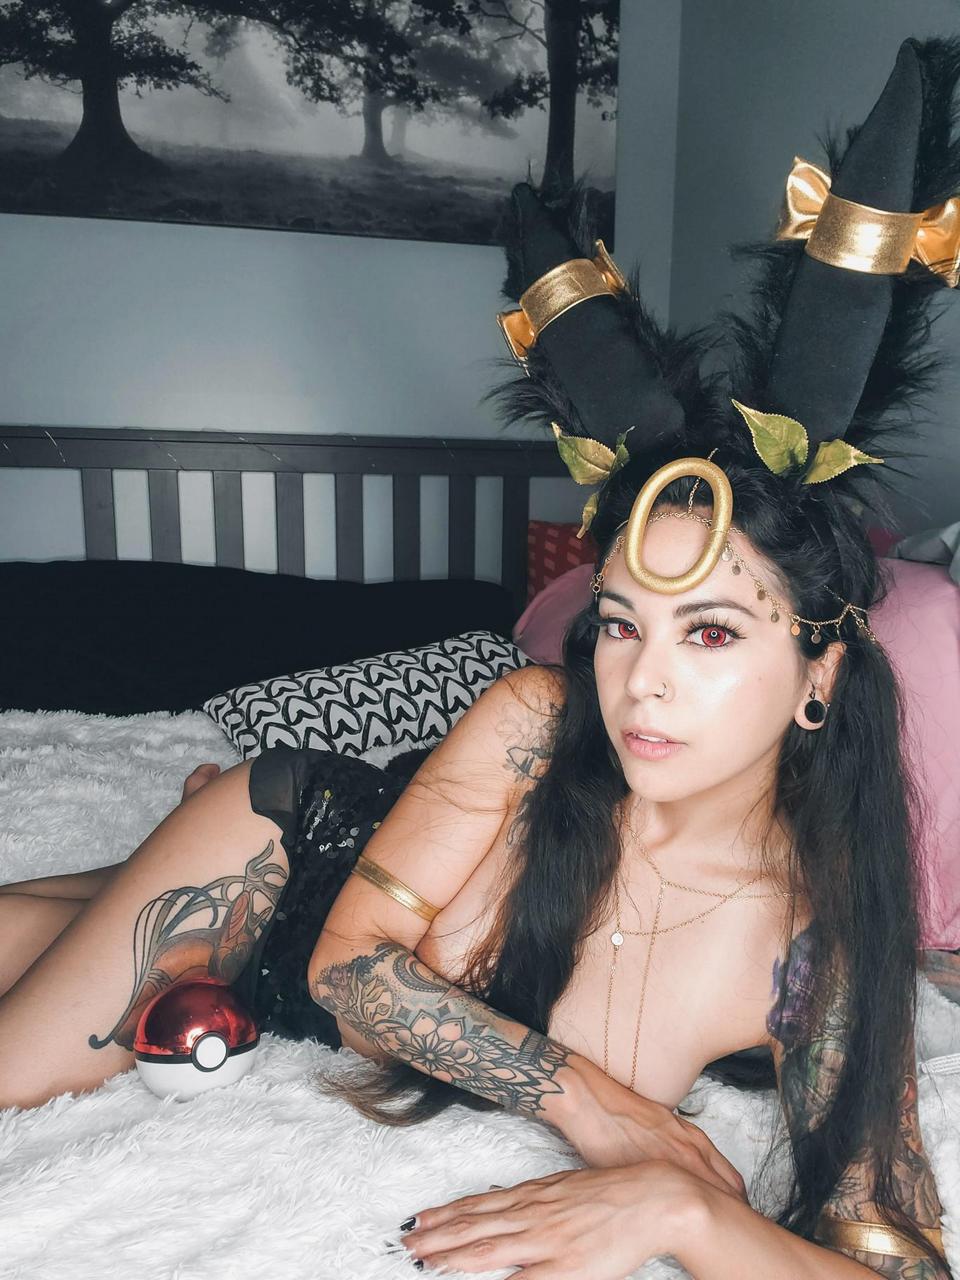 My Friends Umbreon Cosplay Should She Make A Reddit Accoun